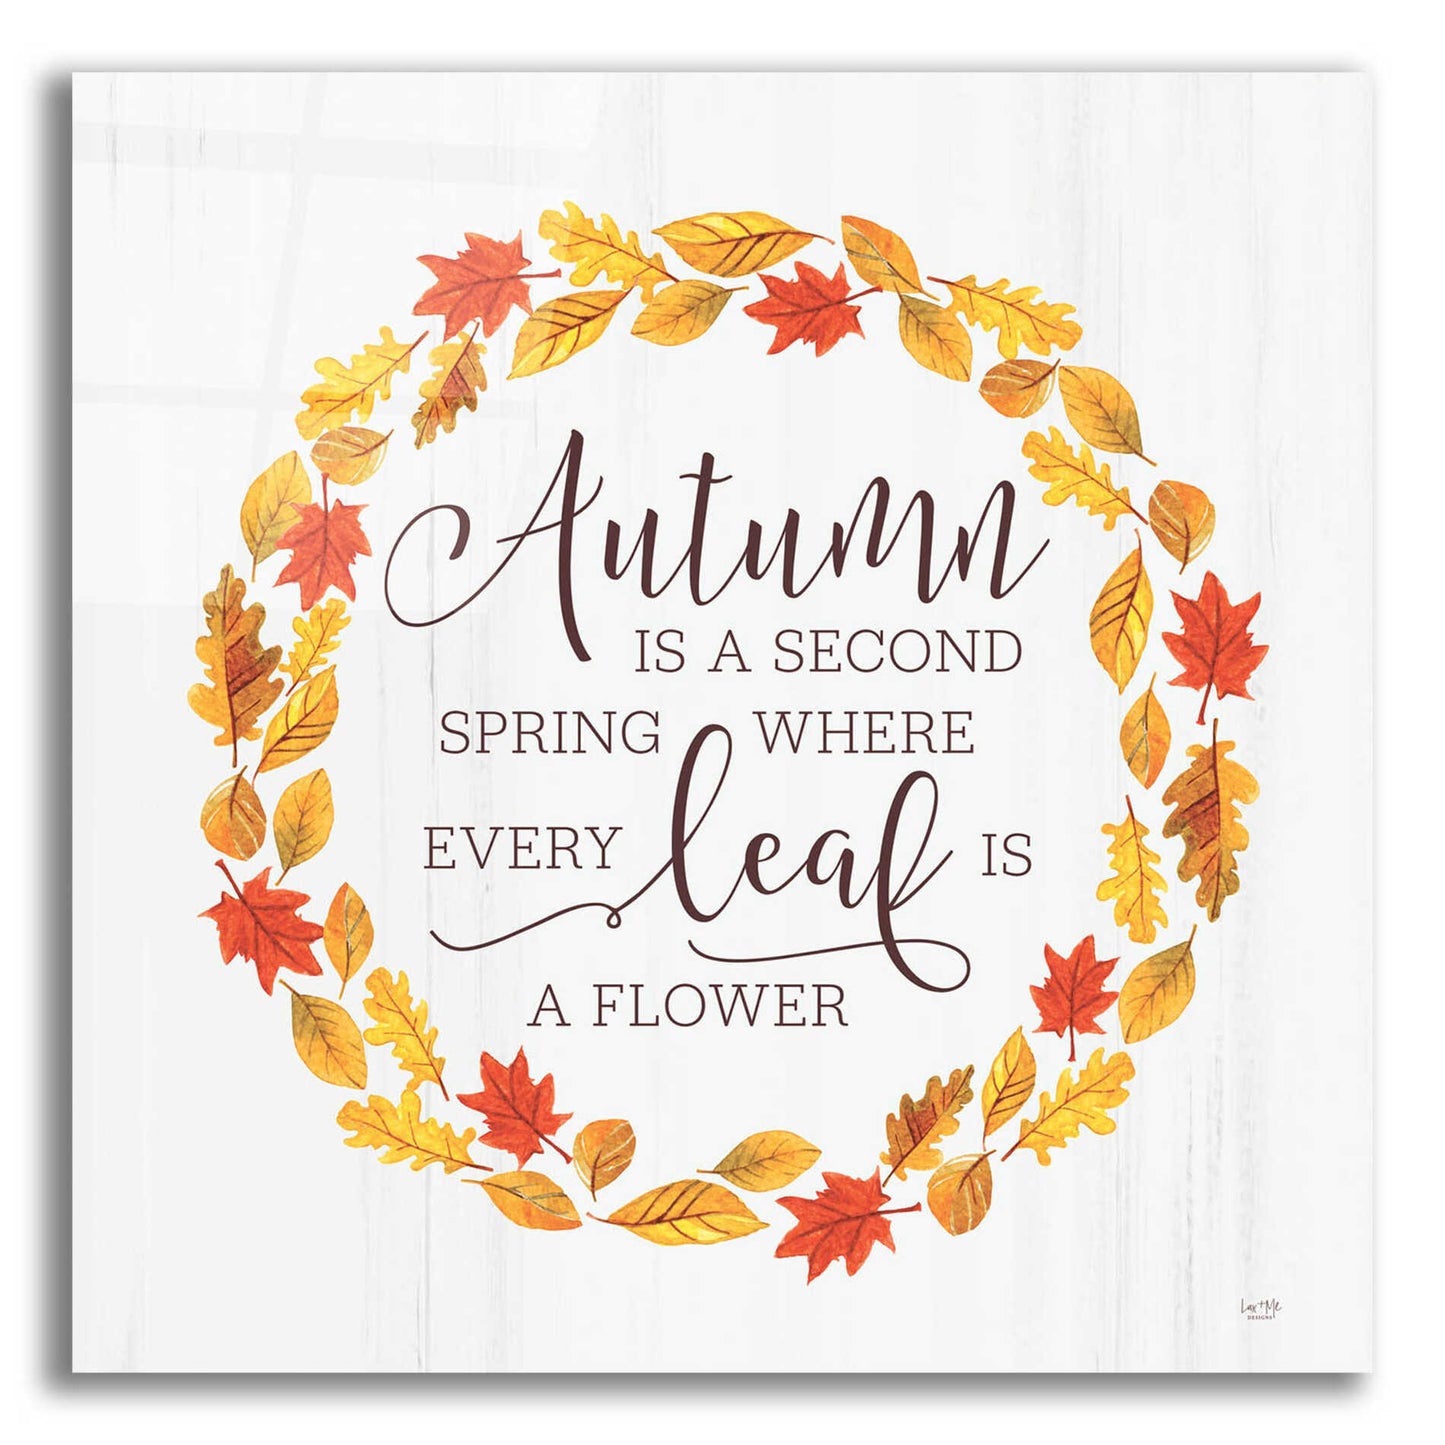 Epic Art 'Autumn is a Second Spring' by Lux + Me Designs, Acrylic Glass Wall Art